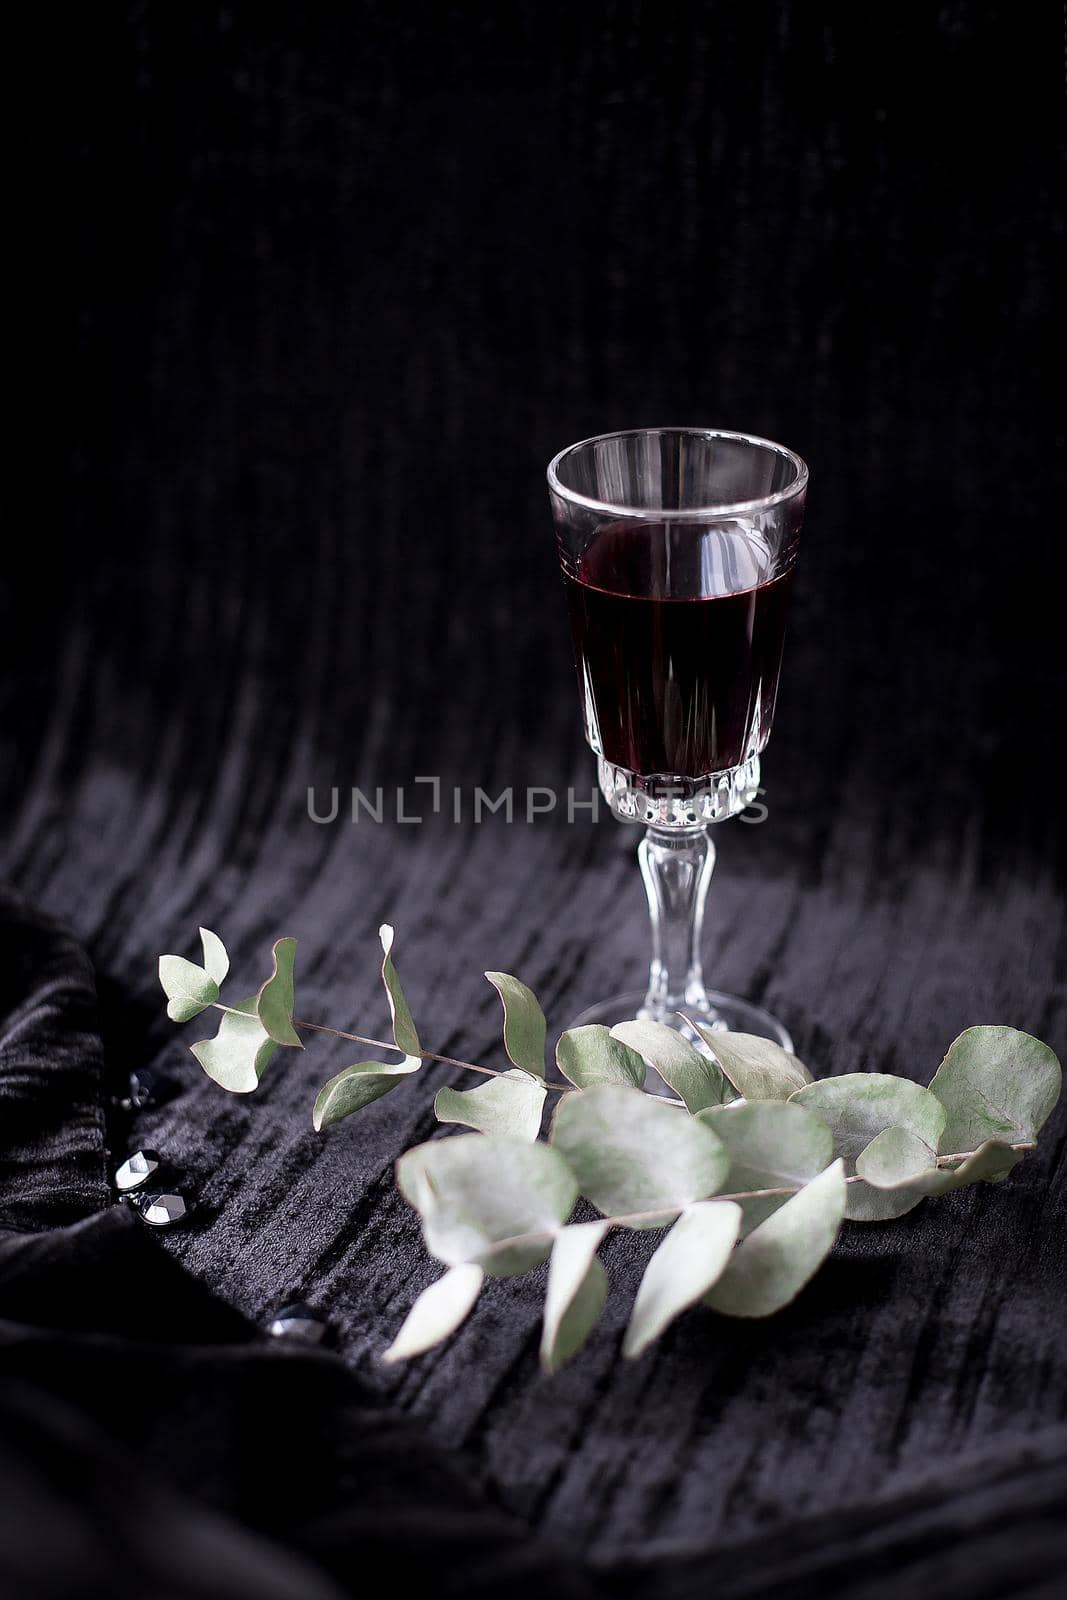 twig and glass of red wine on a black background Velvet by sfinks